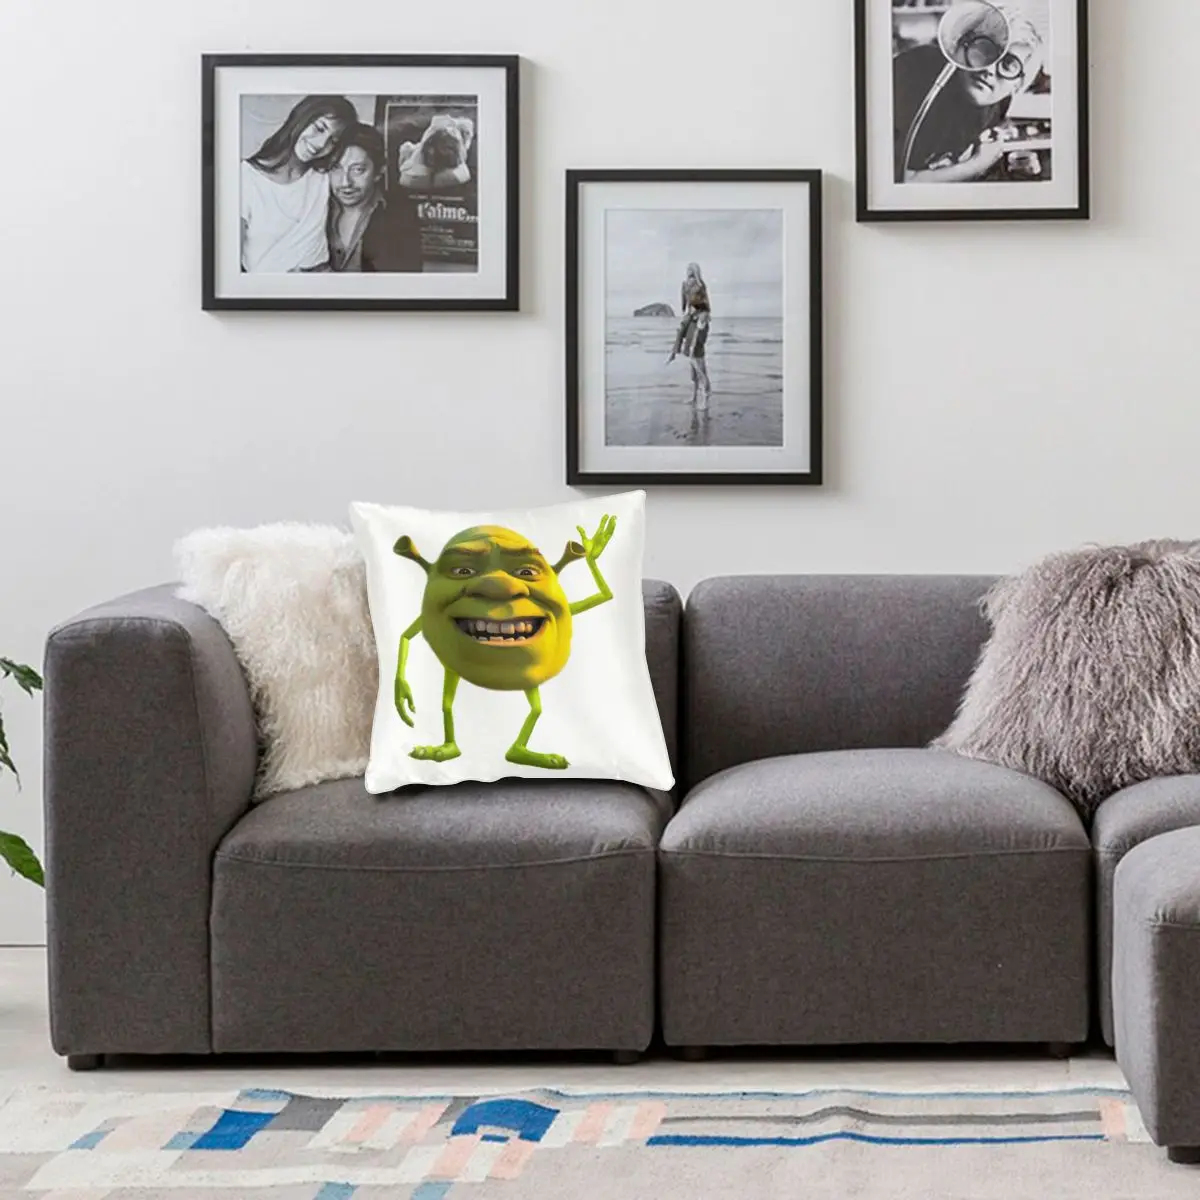  Meme Throw Pillow Covers Decorative Personalized Funny Shrek  Face Throw Pillow Case for Couch Sofa Bed Car Outdoor Home Decor 18 in X 18  in : Home & Kitchen